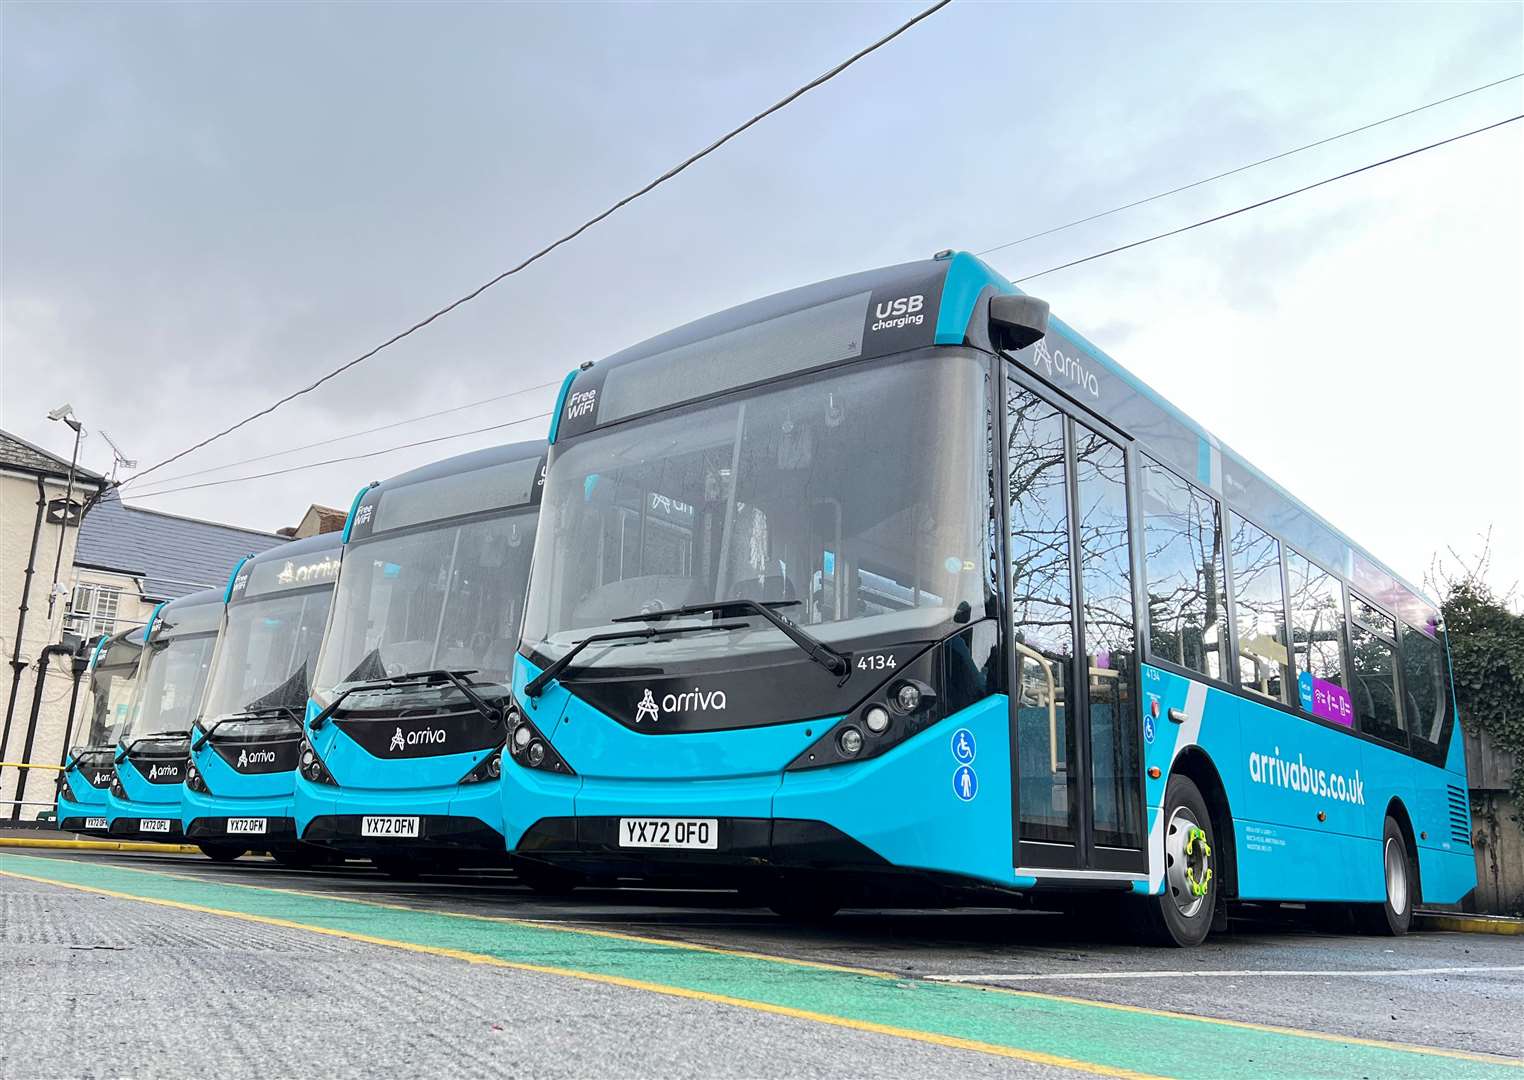 Arriva buses were targeted by missiles last Thursday